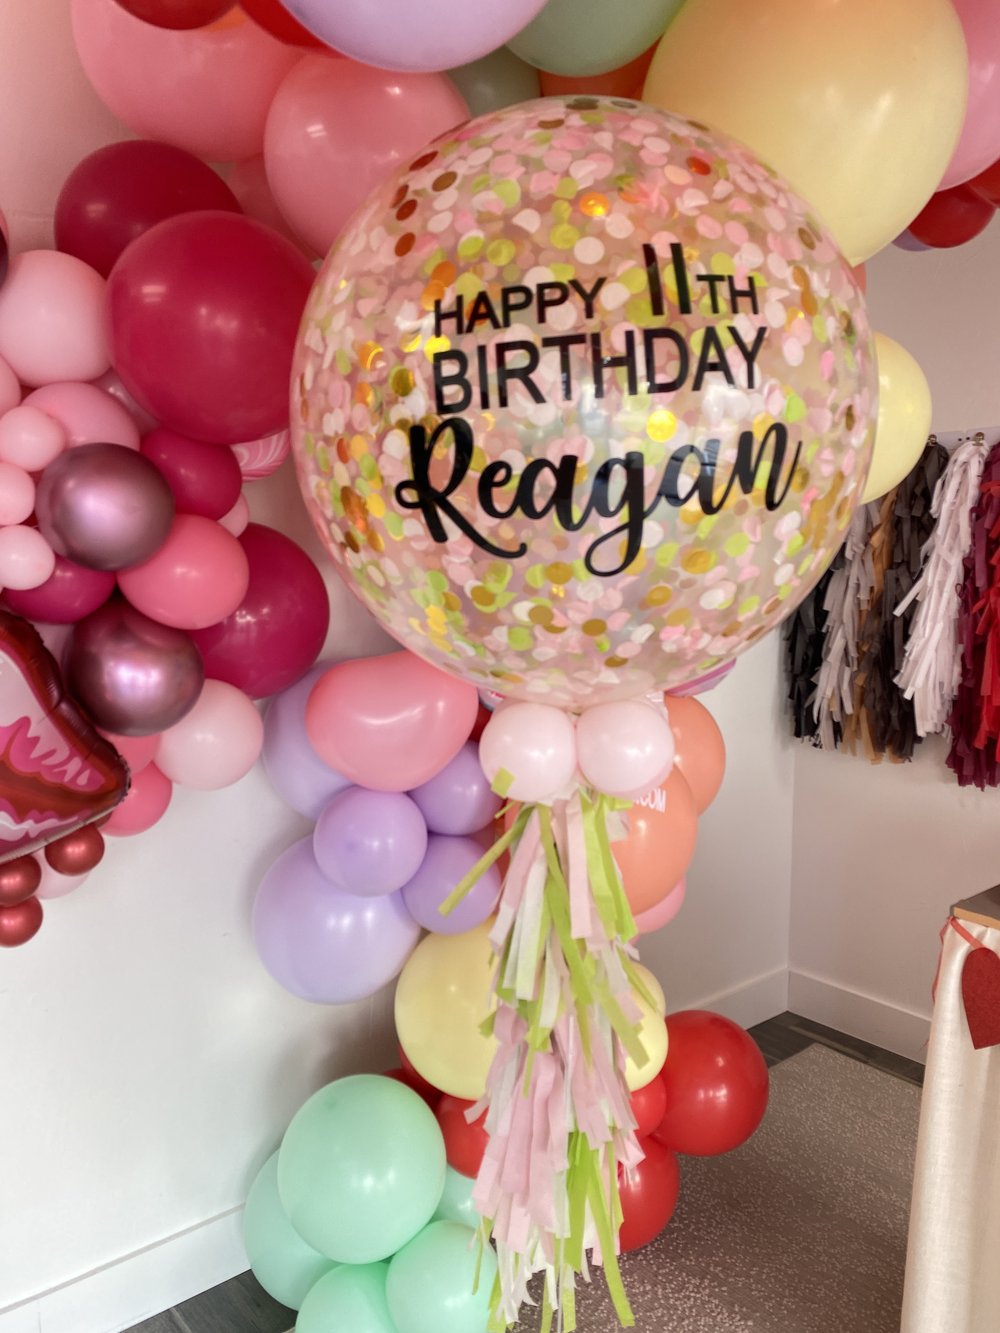 Pink Chic - Personalized Happy Birthday Balloon with Tassel